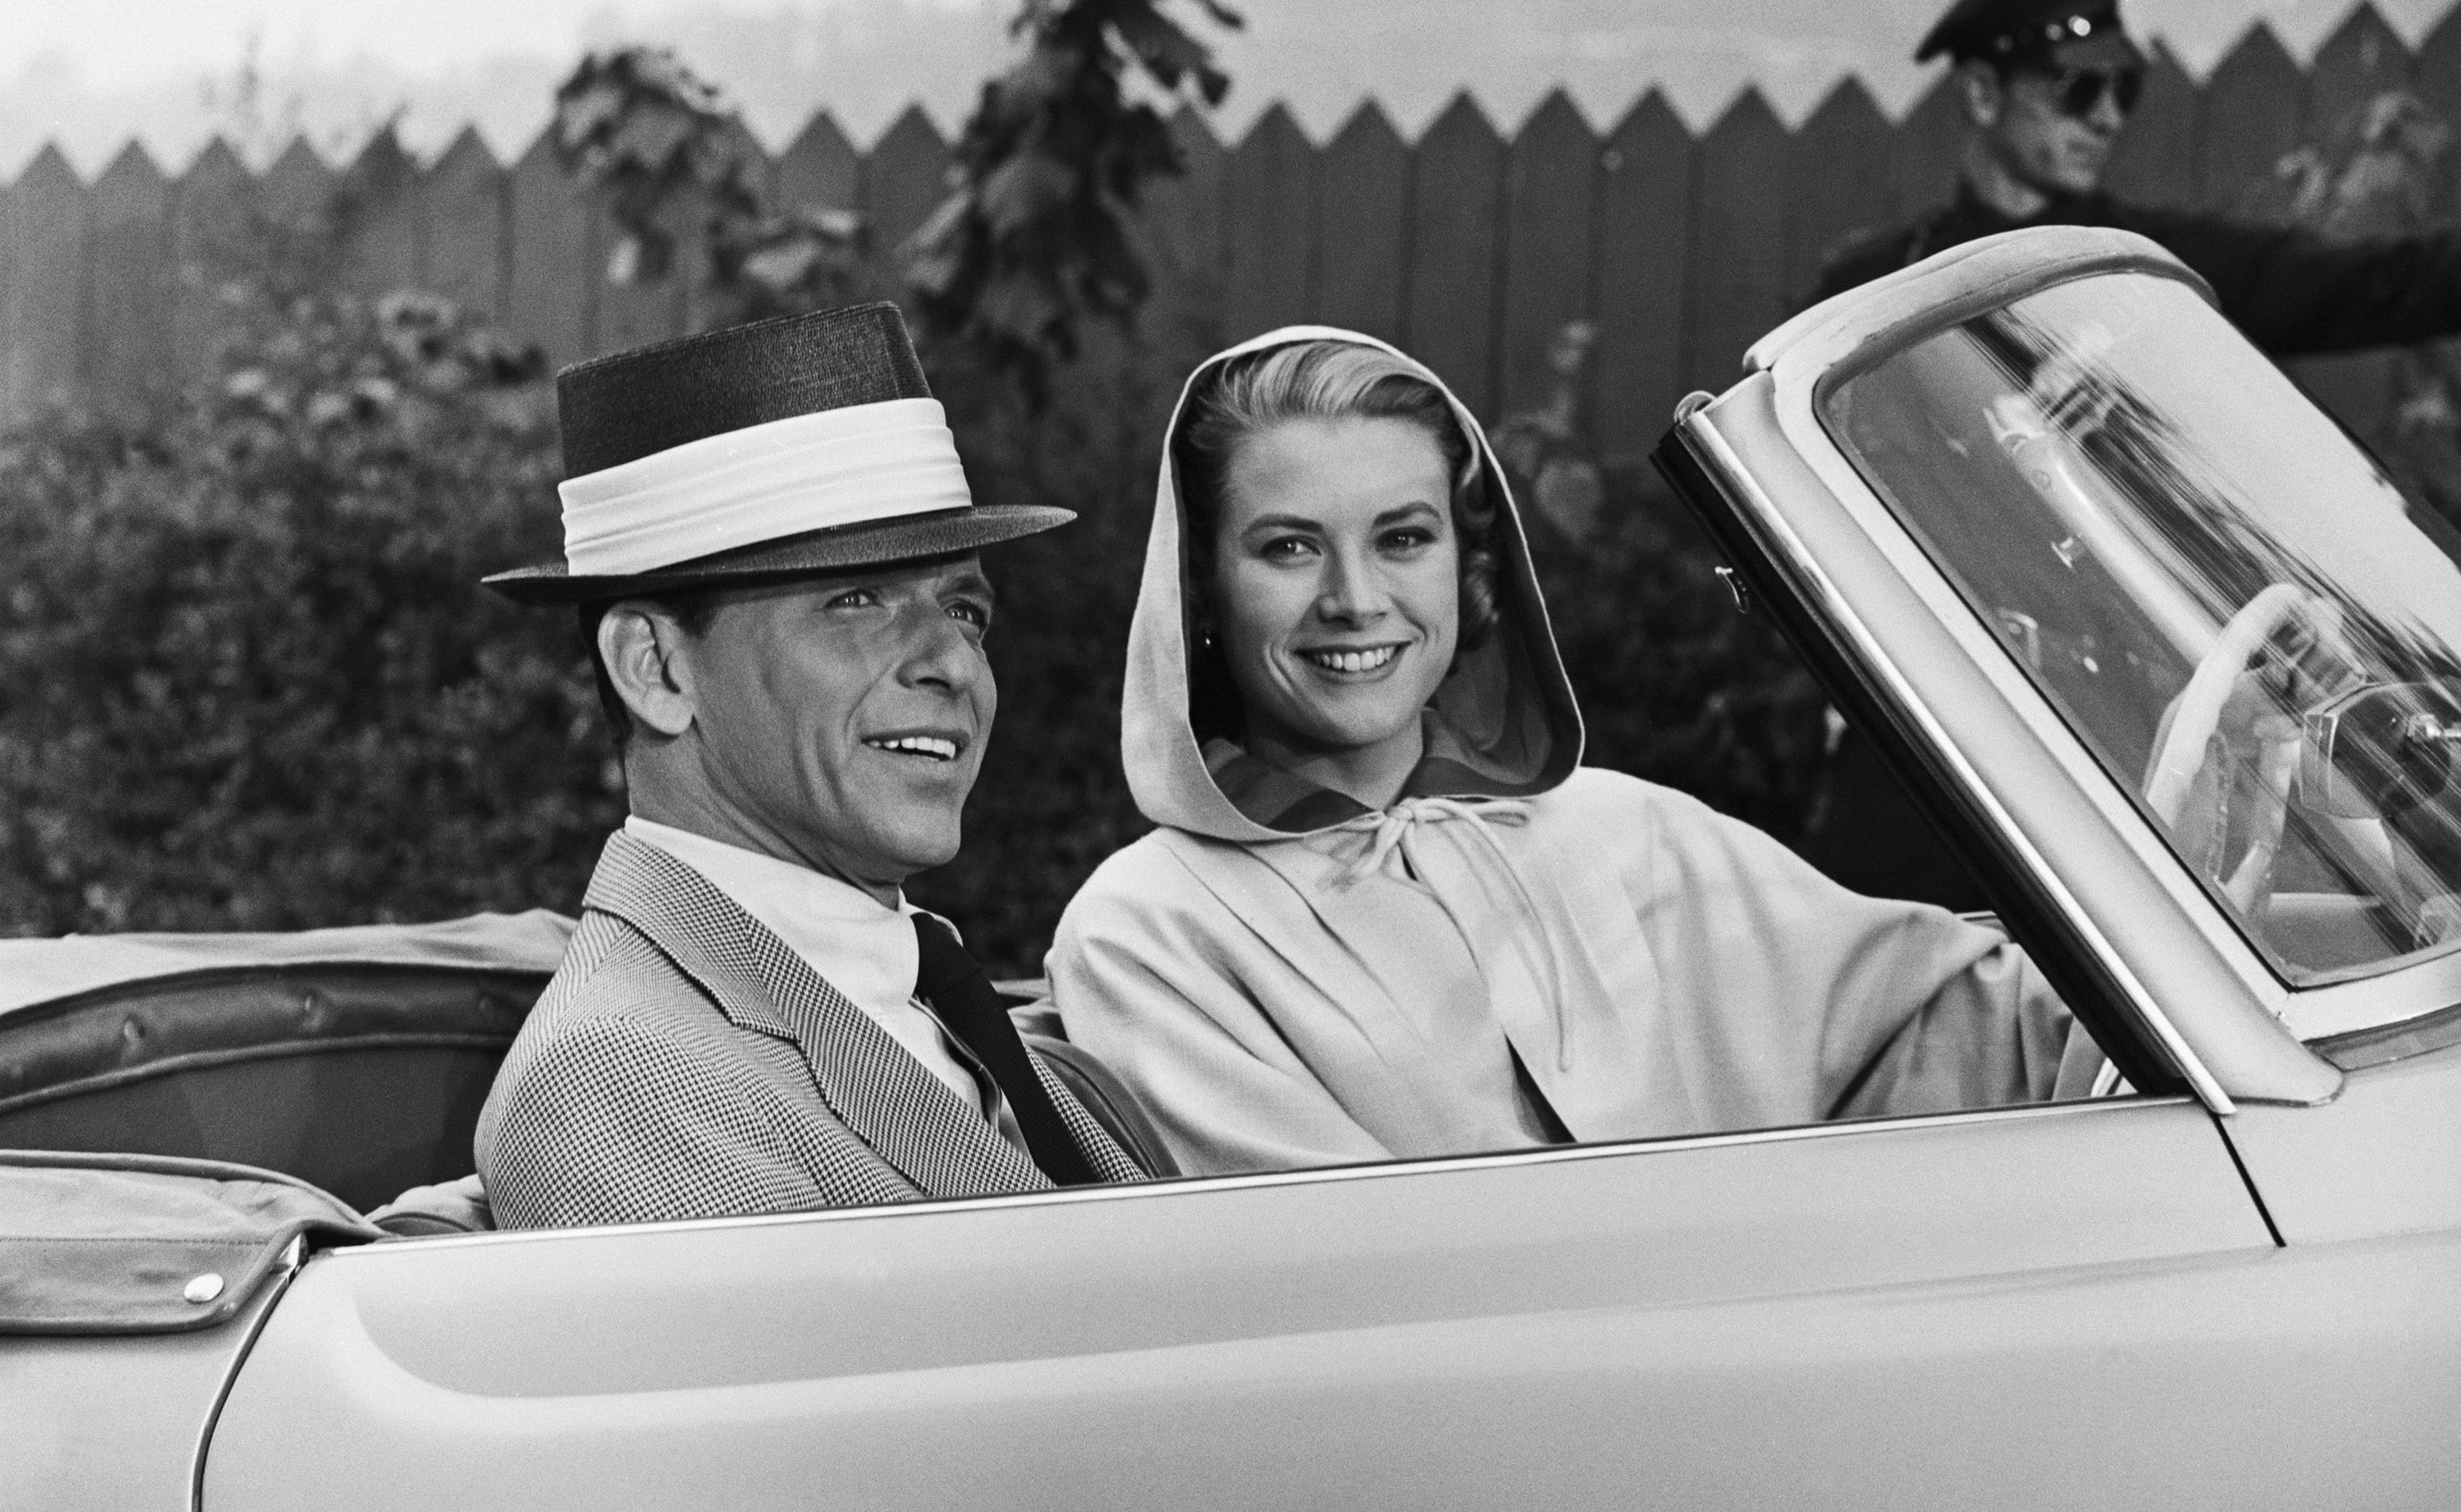 Frank Sinatra And Grace Kelly, man and woman riding card, Vintage